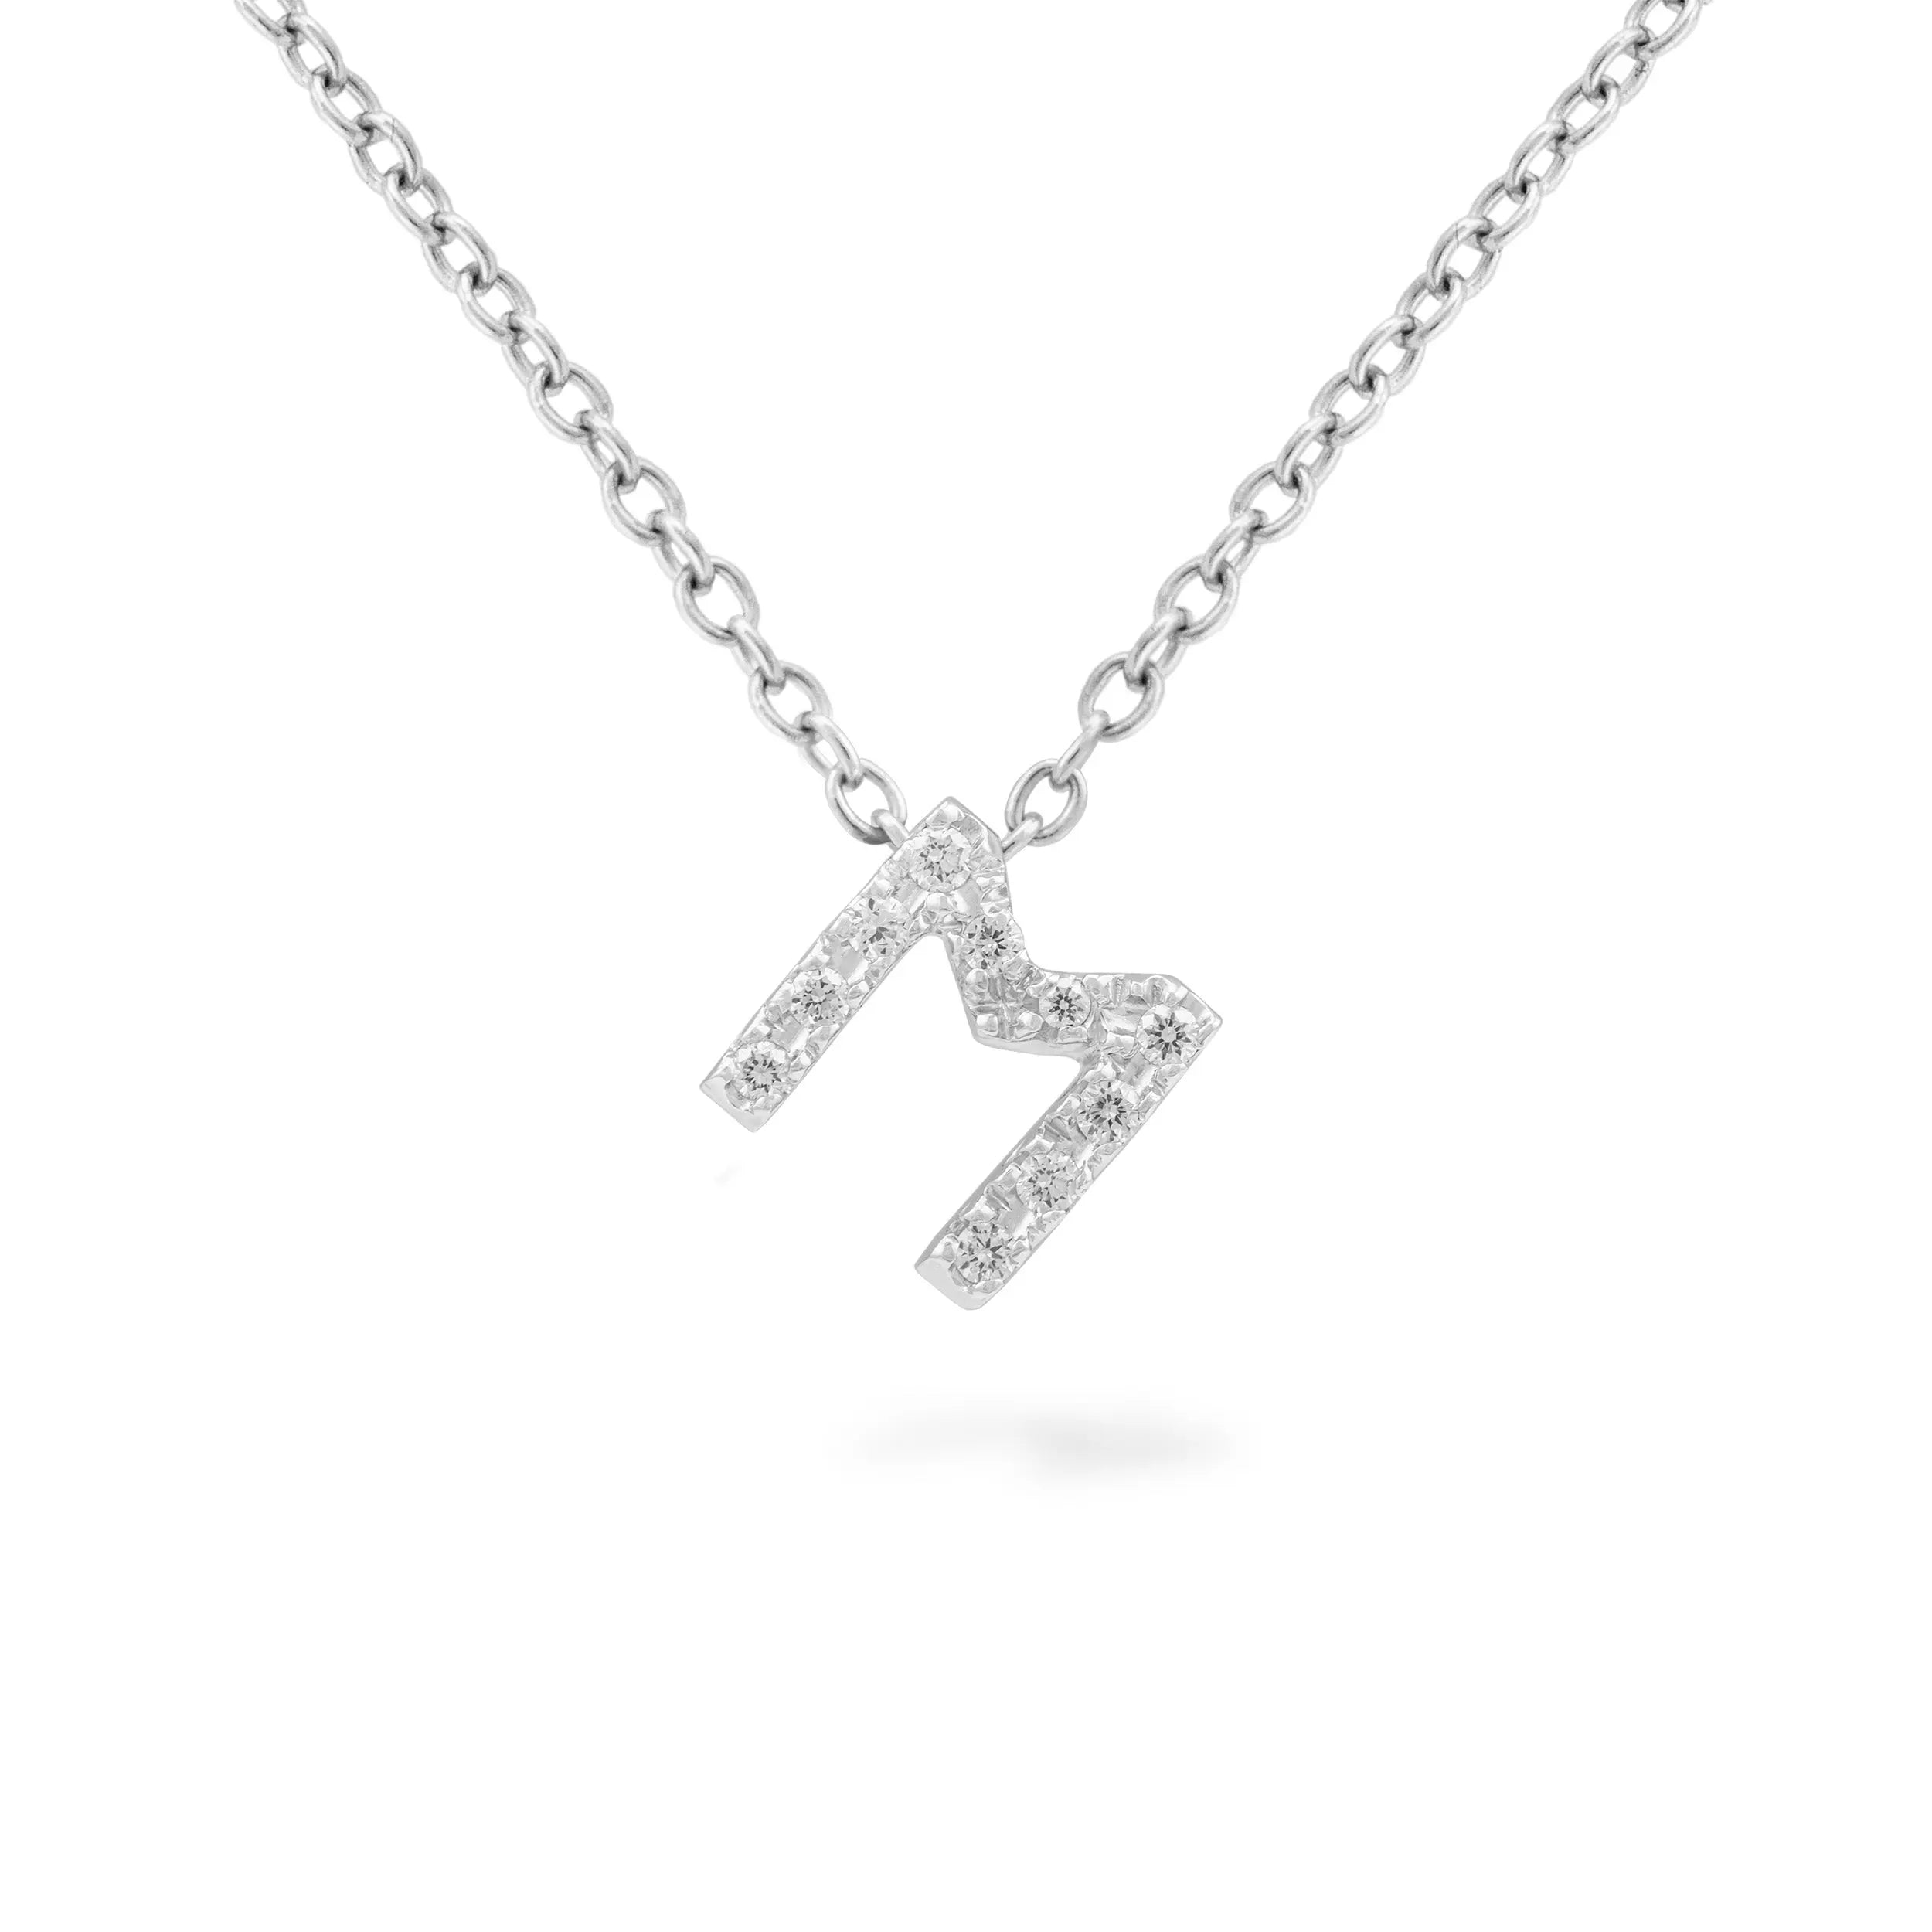 18K white gold necklace with letter pendant in white gold and diamonds .07 cttw  Length: 18 inches  If an item is out of stock, please allow 4-6 weeks for delivery  Designed by Piero Milano